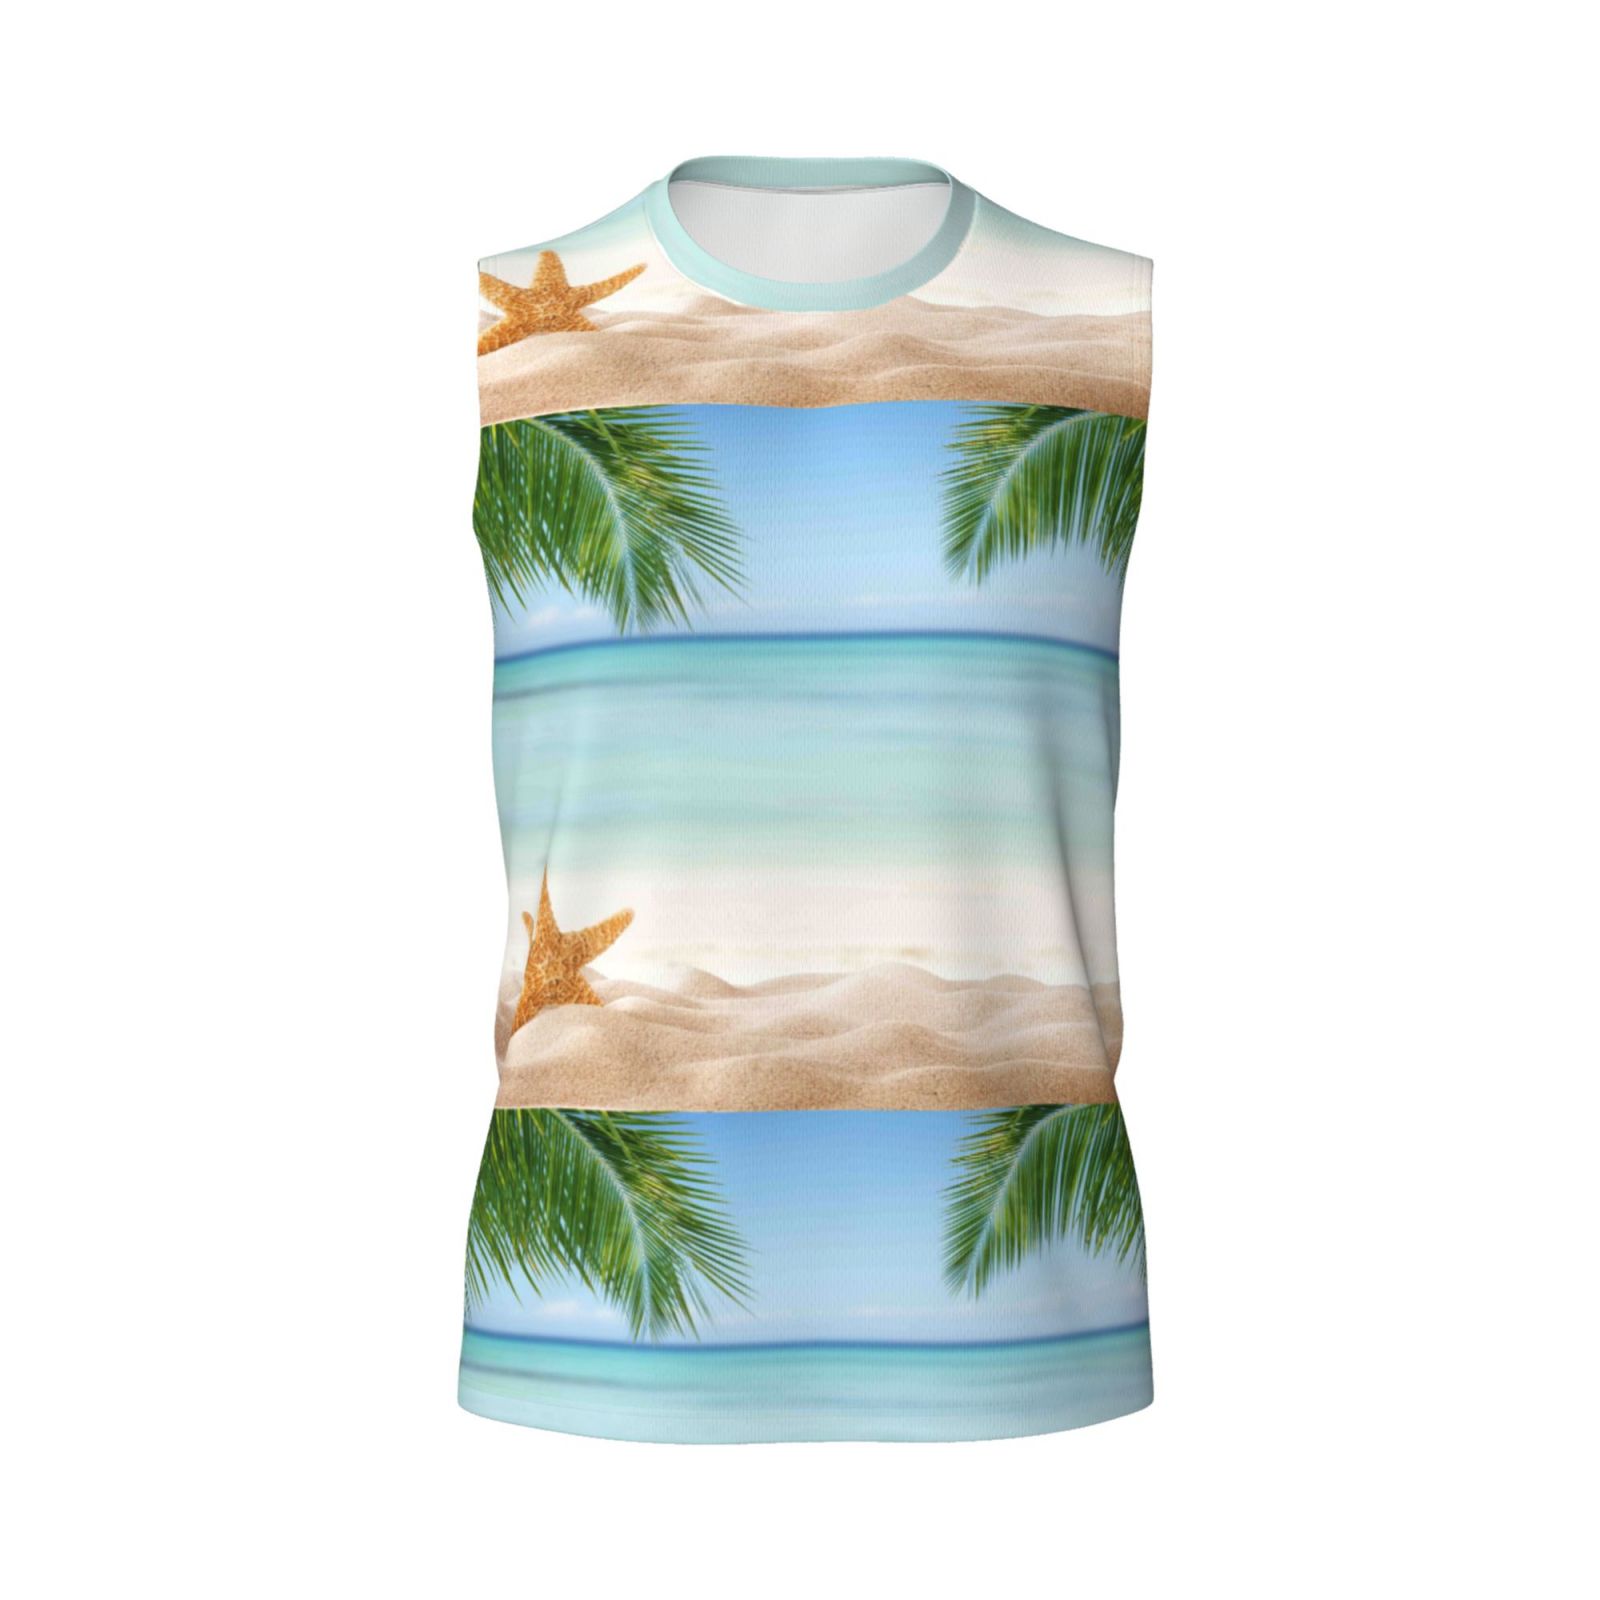 Disketp Starfish In Beach Sleeveless Tshirts For Men, Muscle Shirts For ...